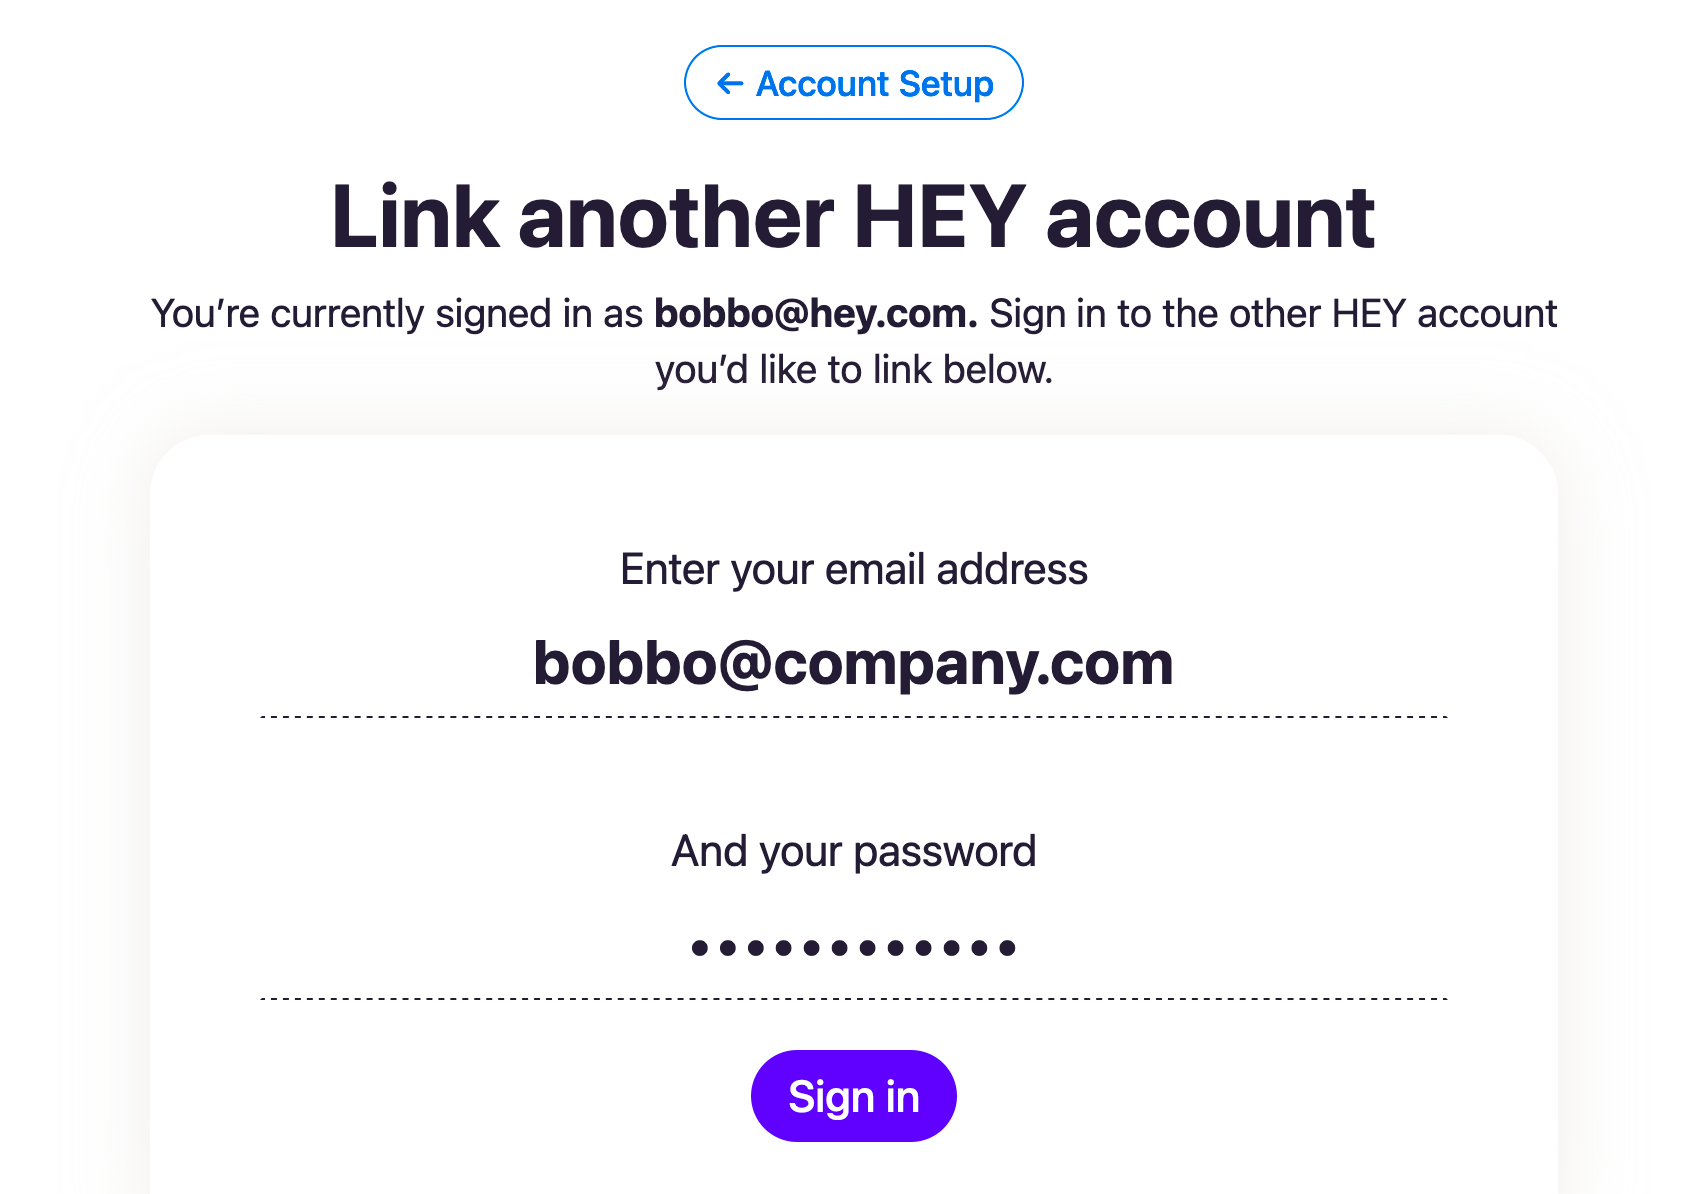 Enter the credentials of the account you want to add